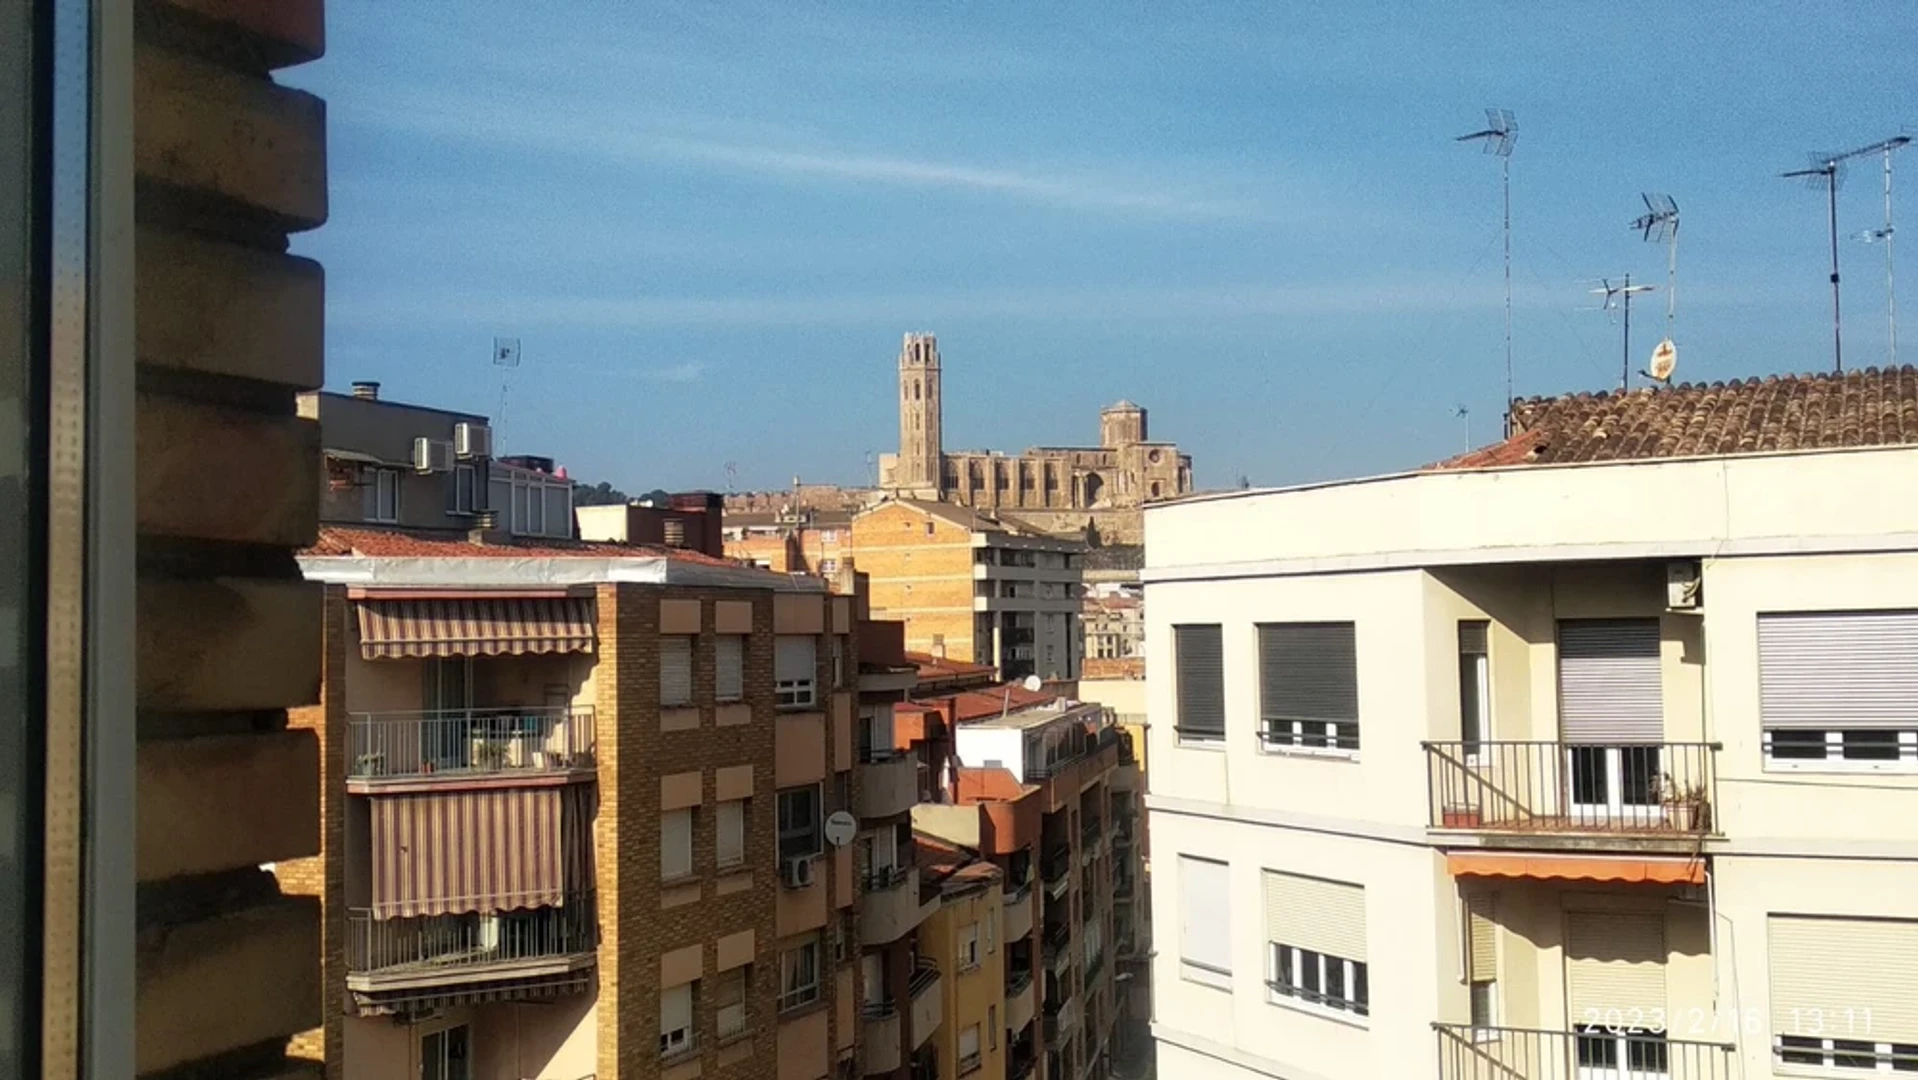 Room for rent with double bed Lleida